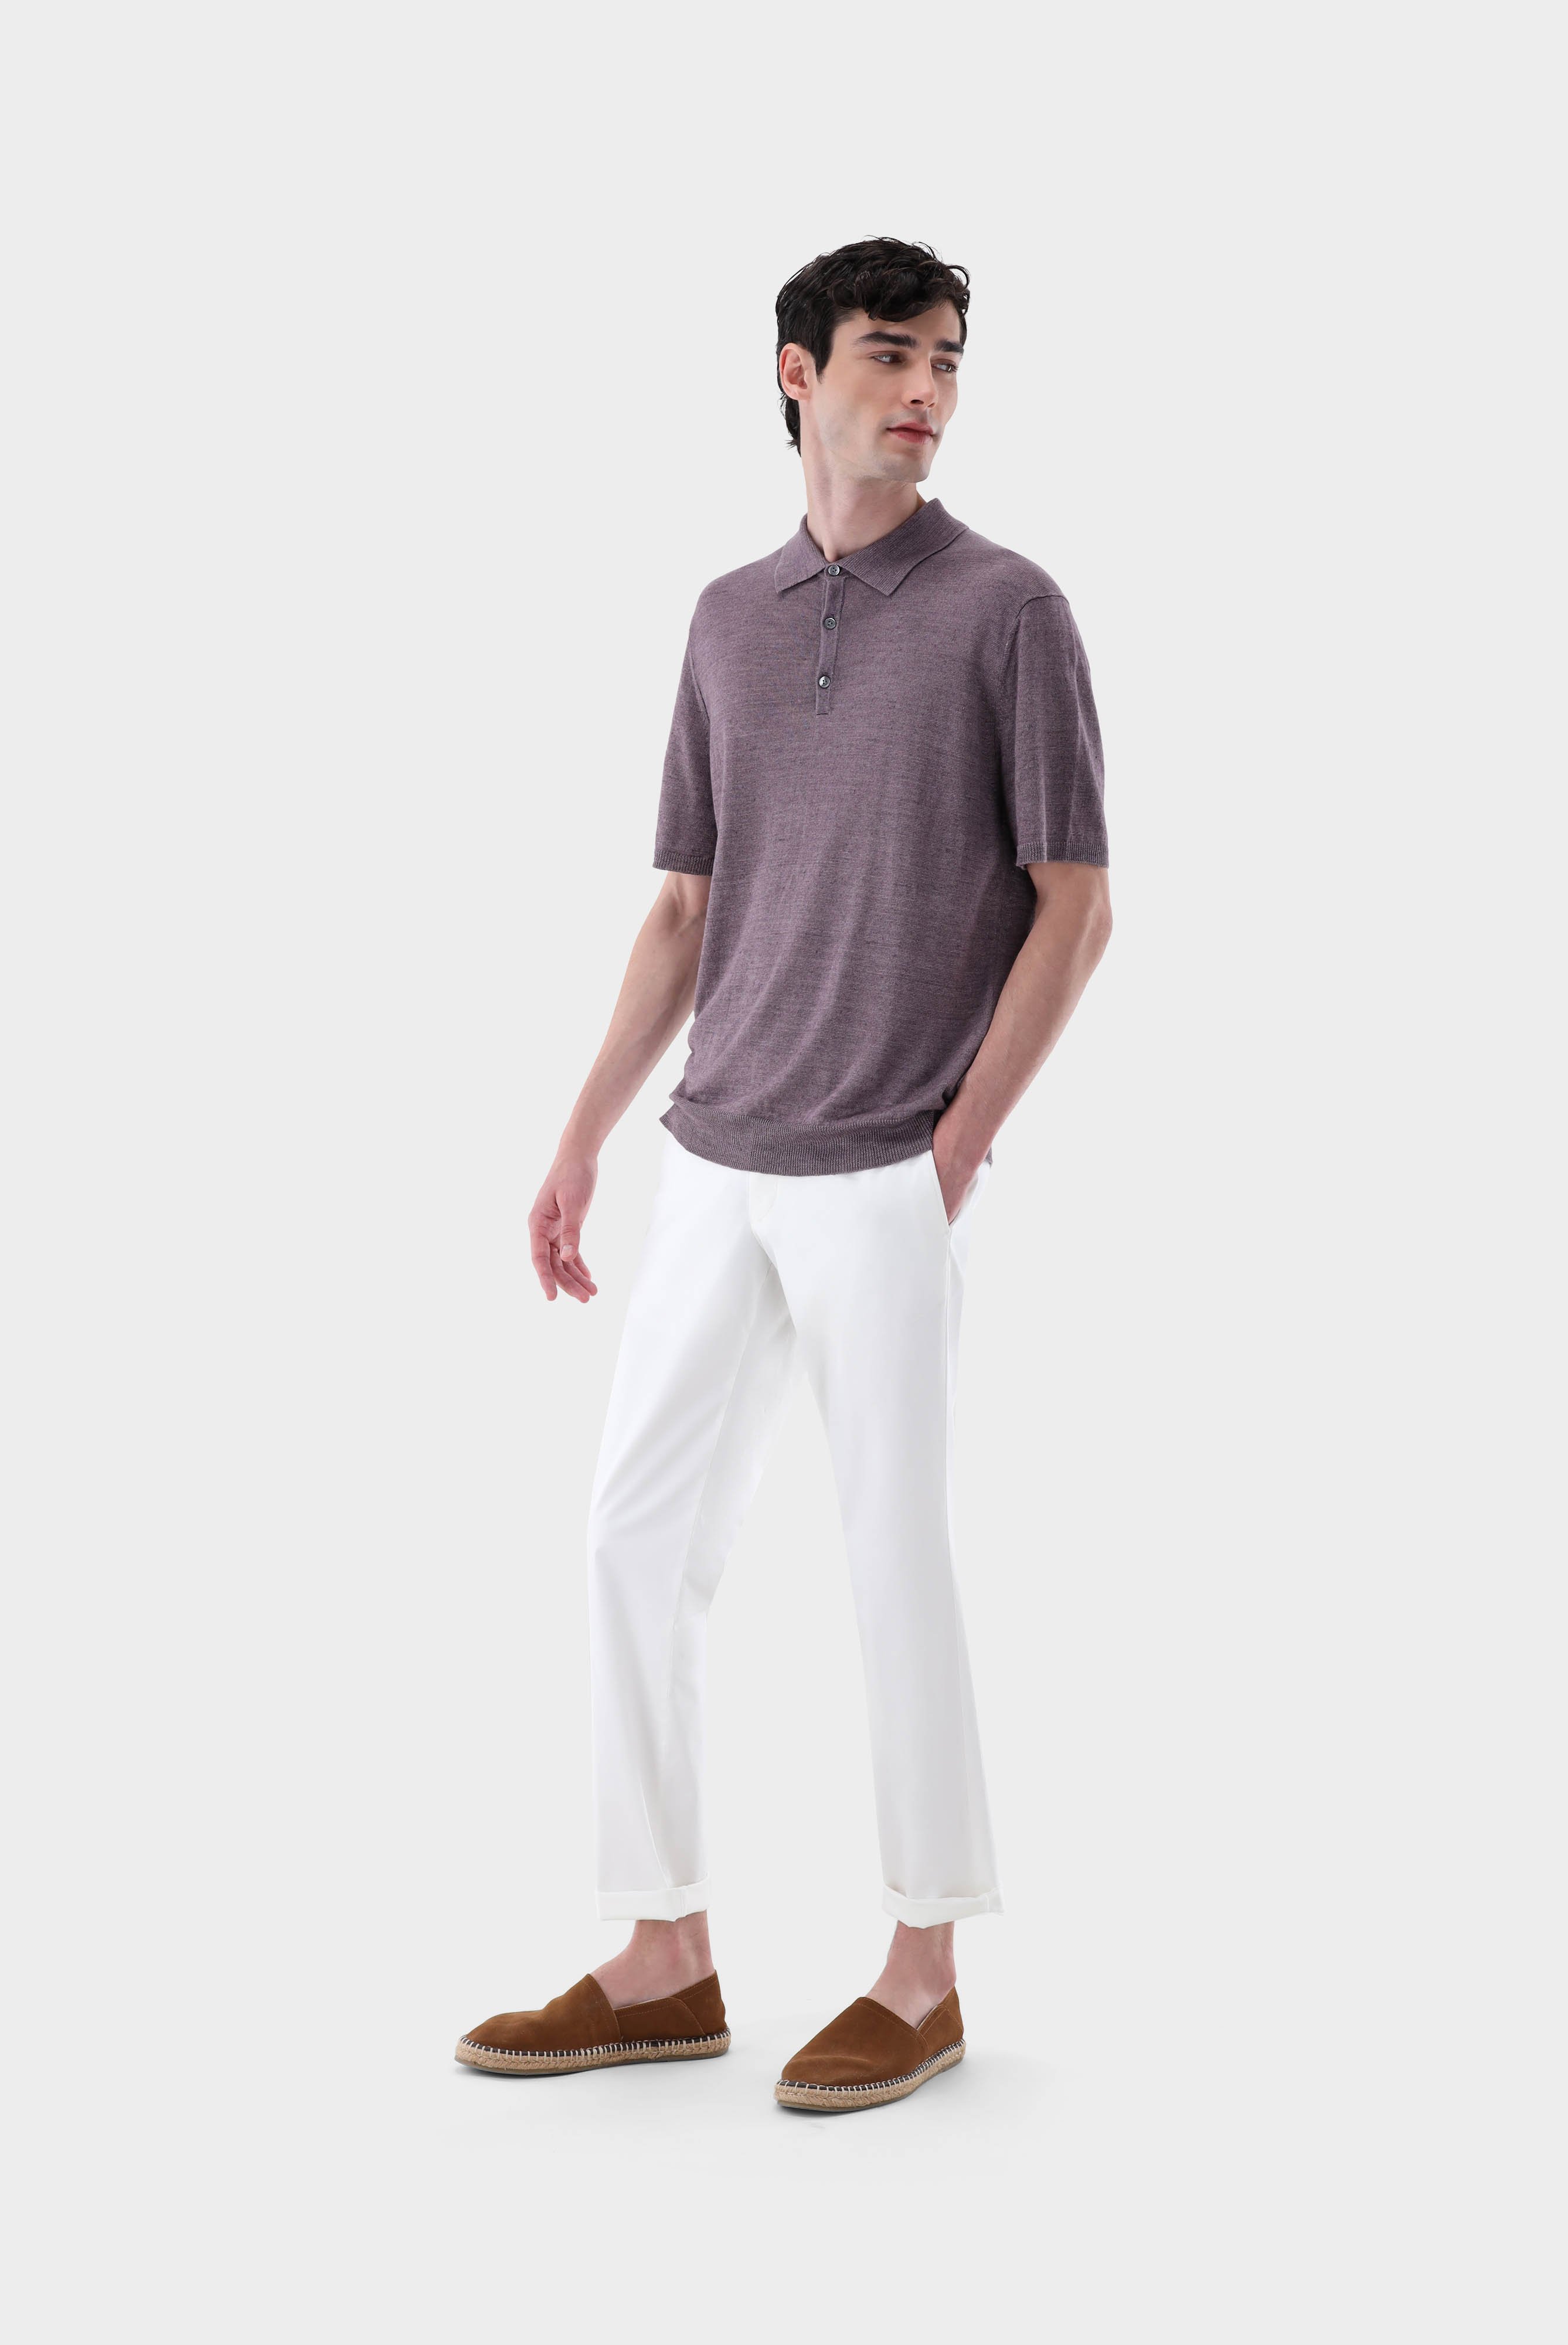 Poloshirts+Knit Polo in Linen+82.8603..S00169.680.S